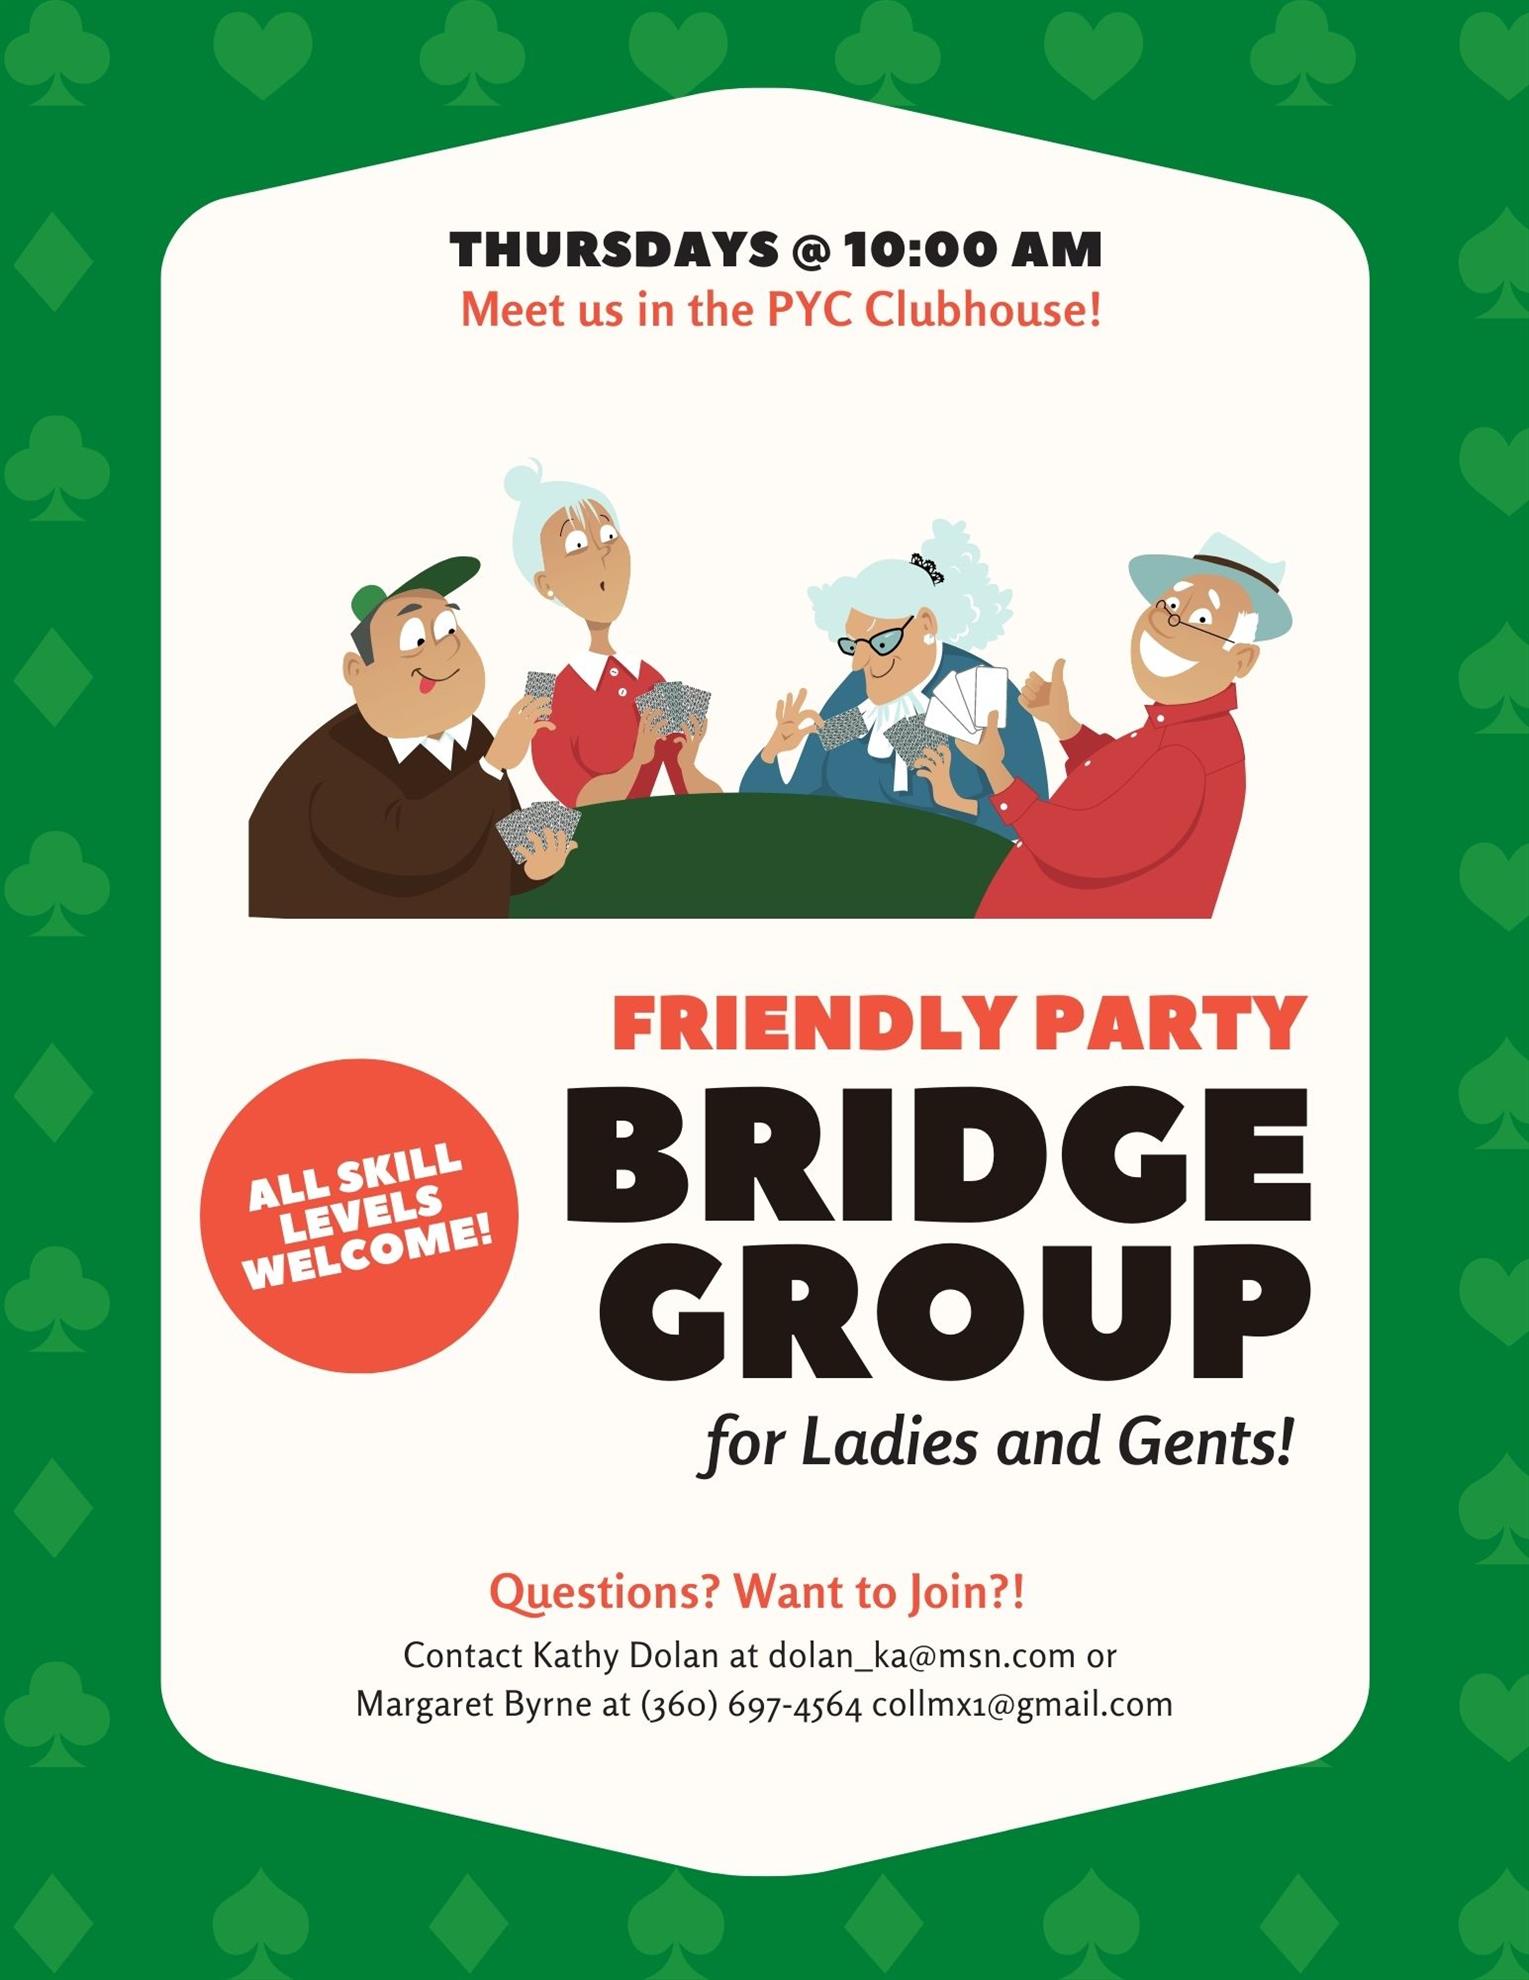 Bridge Group for Ladies and Gents